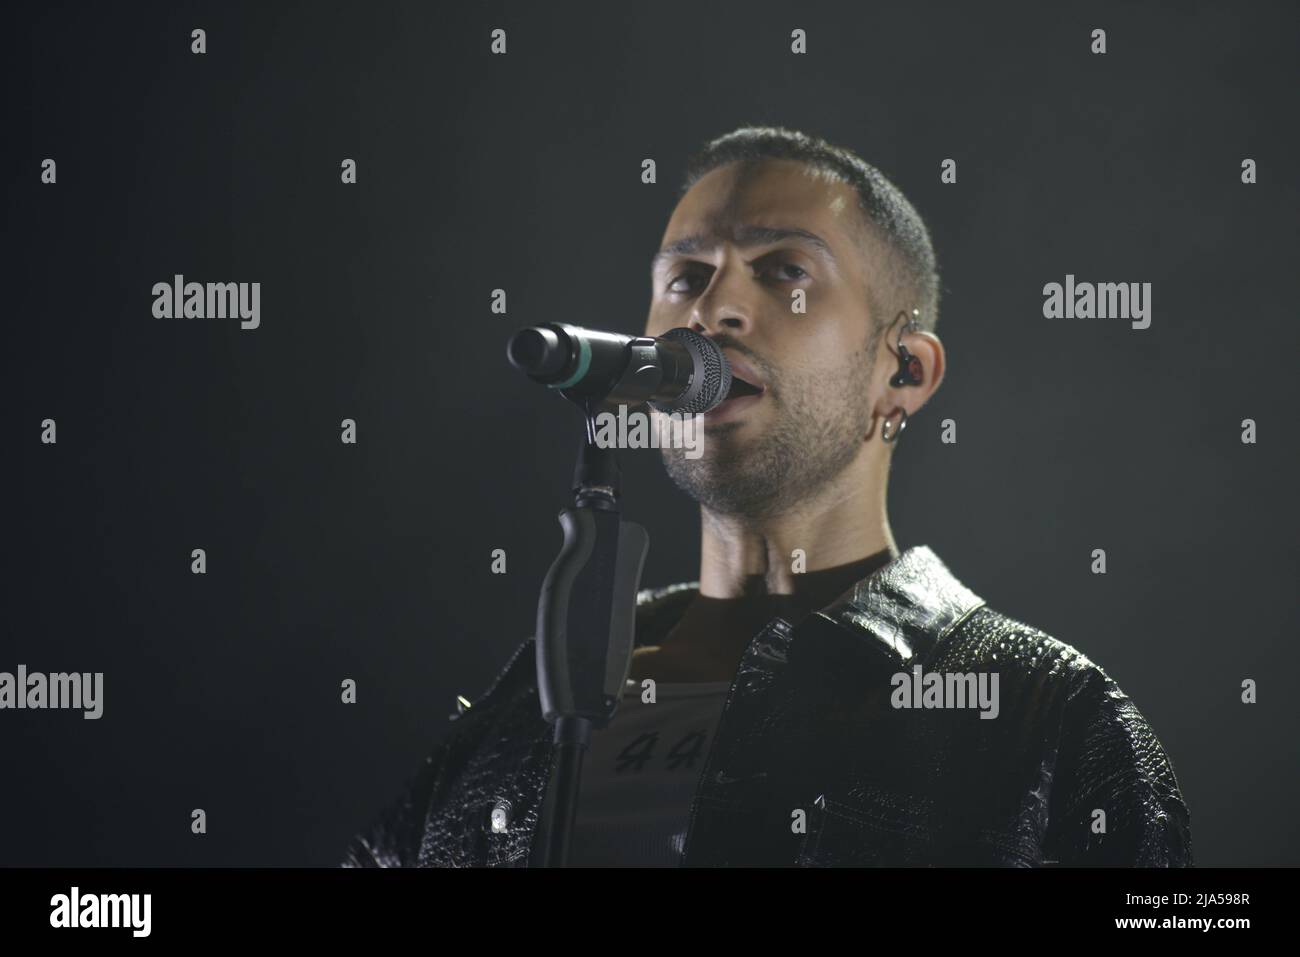 Alessandro Mahmoud, known professionally as Mahmood, is an Italian singer-songwriter. He rose to prominence after competing on the sixth season of the Italian version of The X Factor. He has won the Sanremo Music Festival twice, in 2019 with the song 'Soldi' and in 2022 alongside Blanco with the song 'Brividi'. His Sanremo victories allowed him to represent Italy at the Eurovision Song Contest in those respective years, finishing in second place in 2019 and in sixth place in 2022 as the host entrant. Mahmood has released two studio albums, Gioventù bruciata and Ghettolimpo, both of which reach Stock Photo